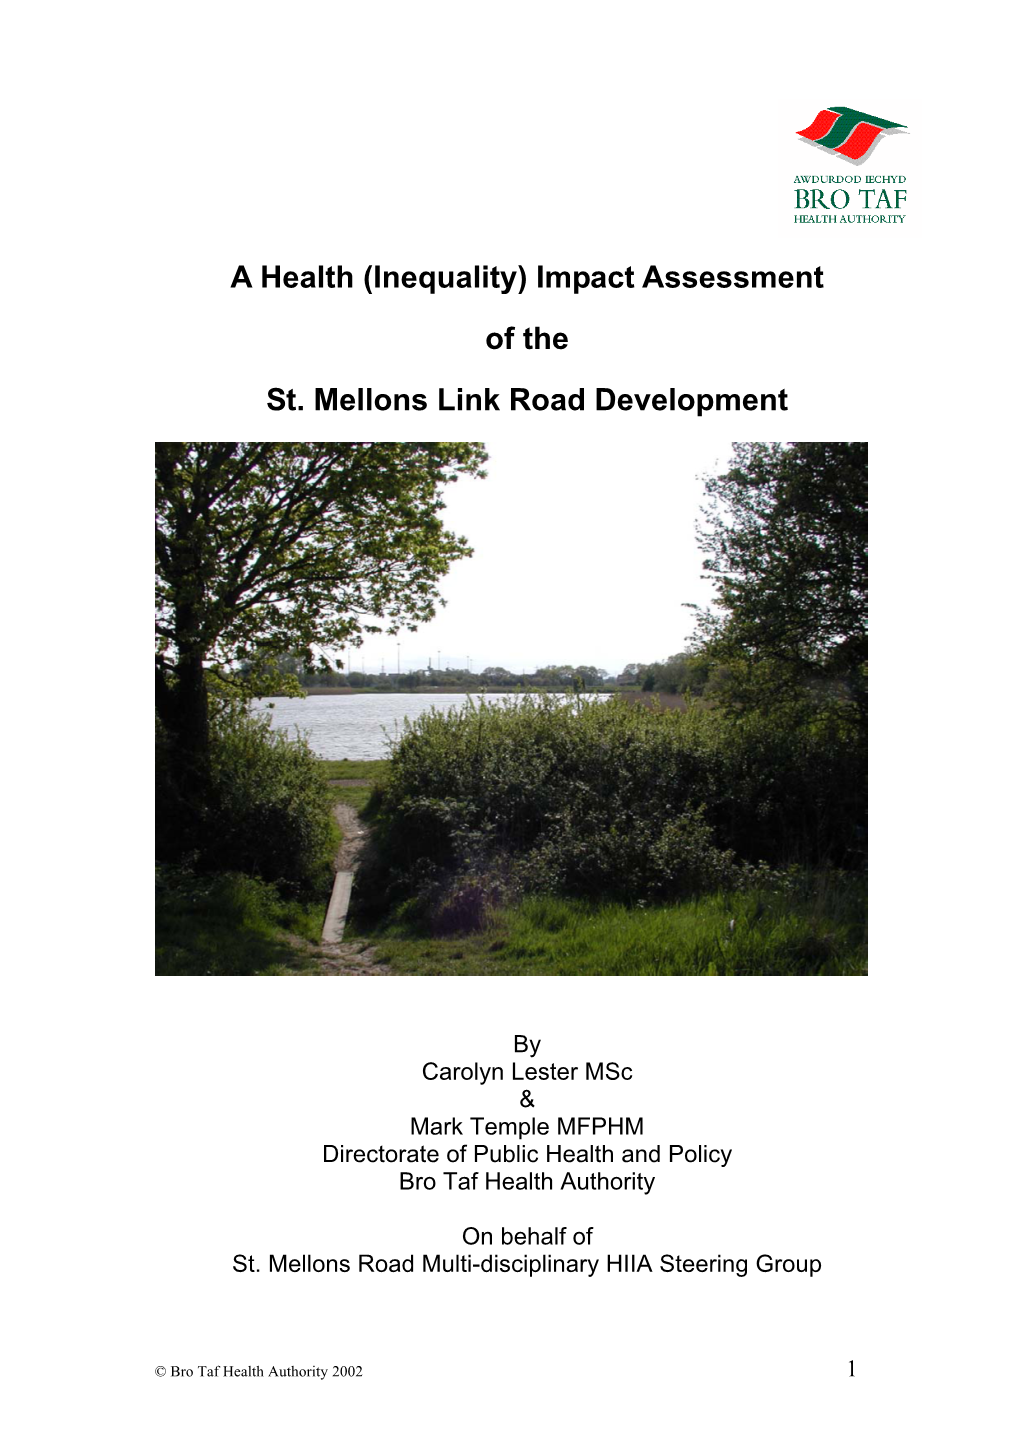 (Inequality) Impact Assessment of the St. Mellons Link Road Development